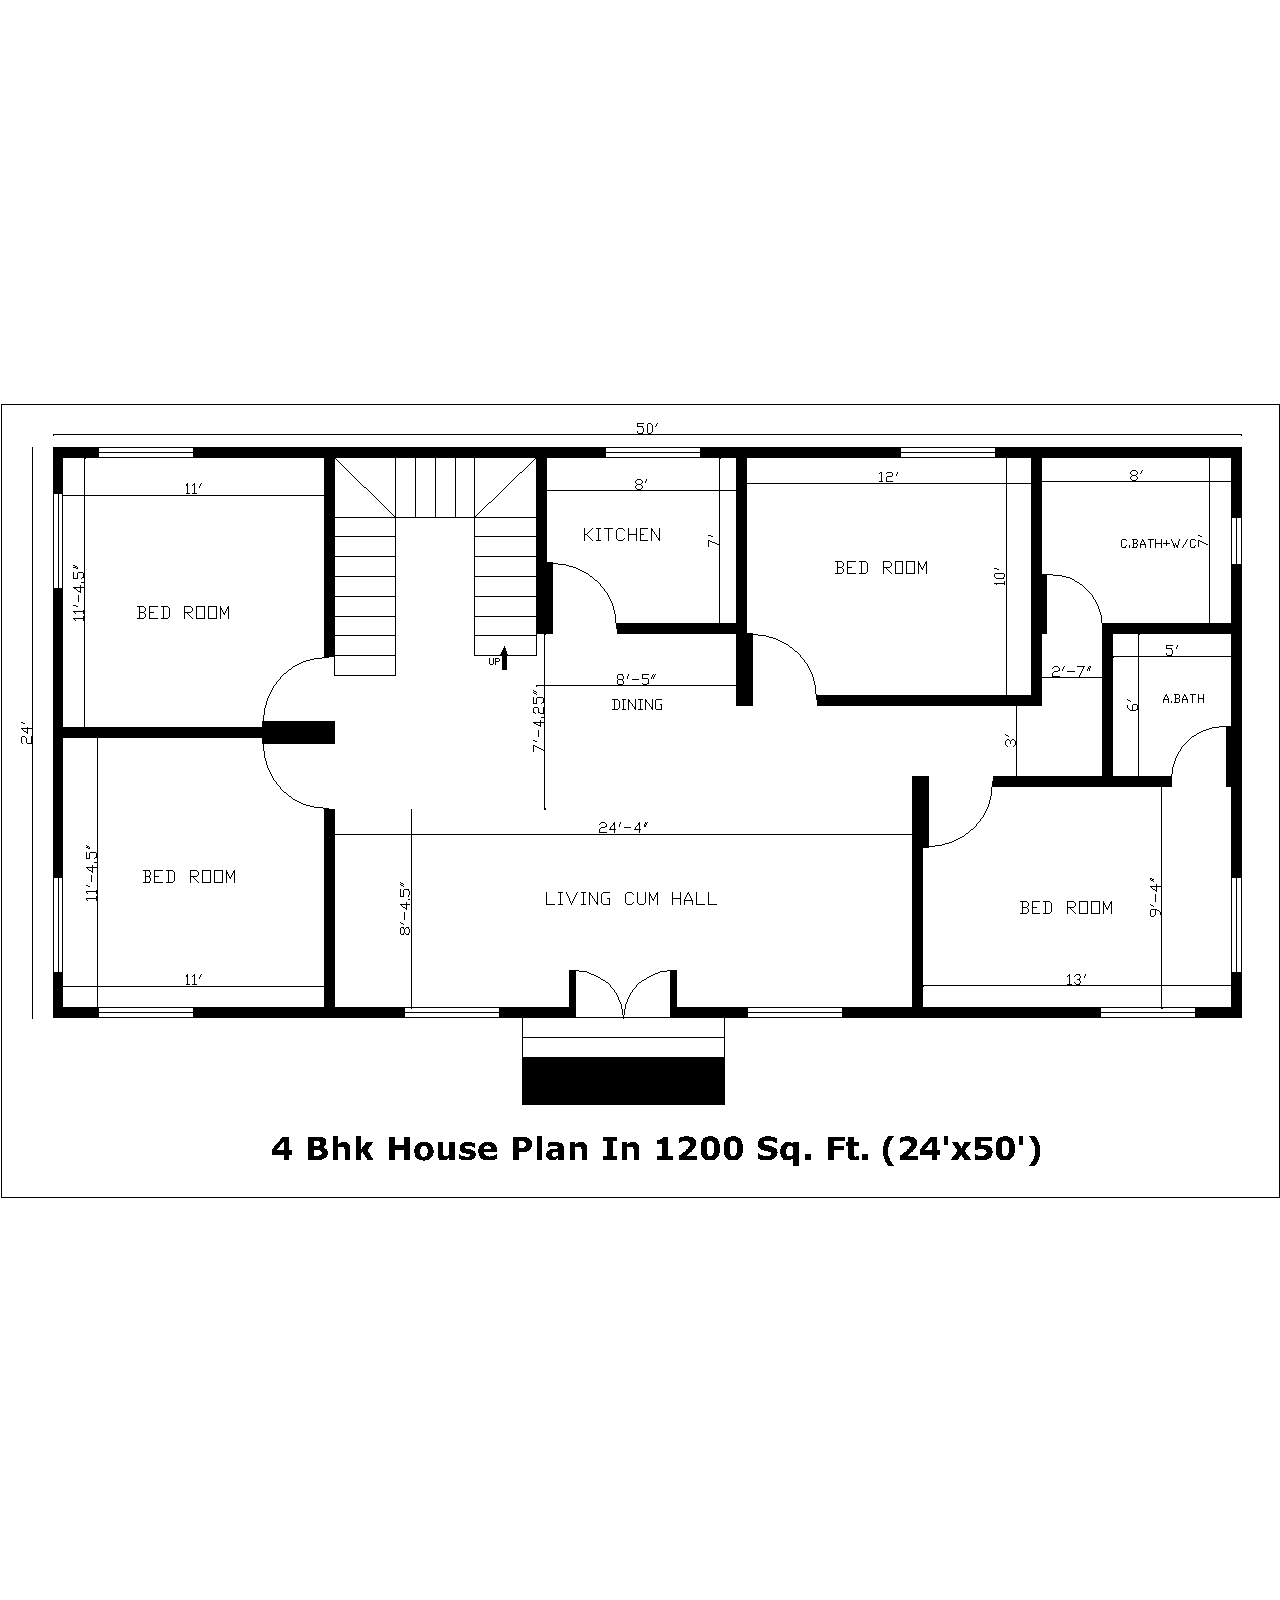 4 Bhk House Plan In 1200 Sq. Ft. (24'x50')